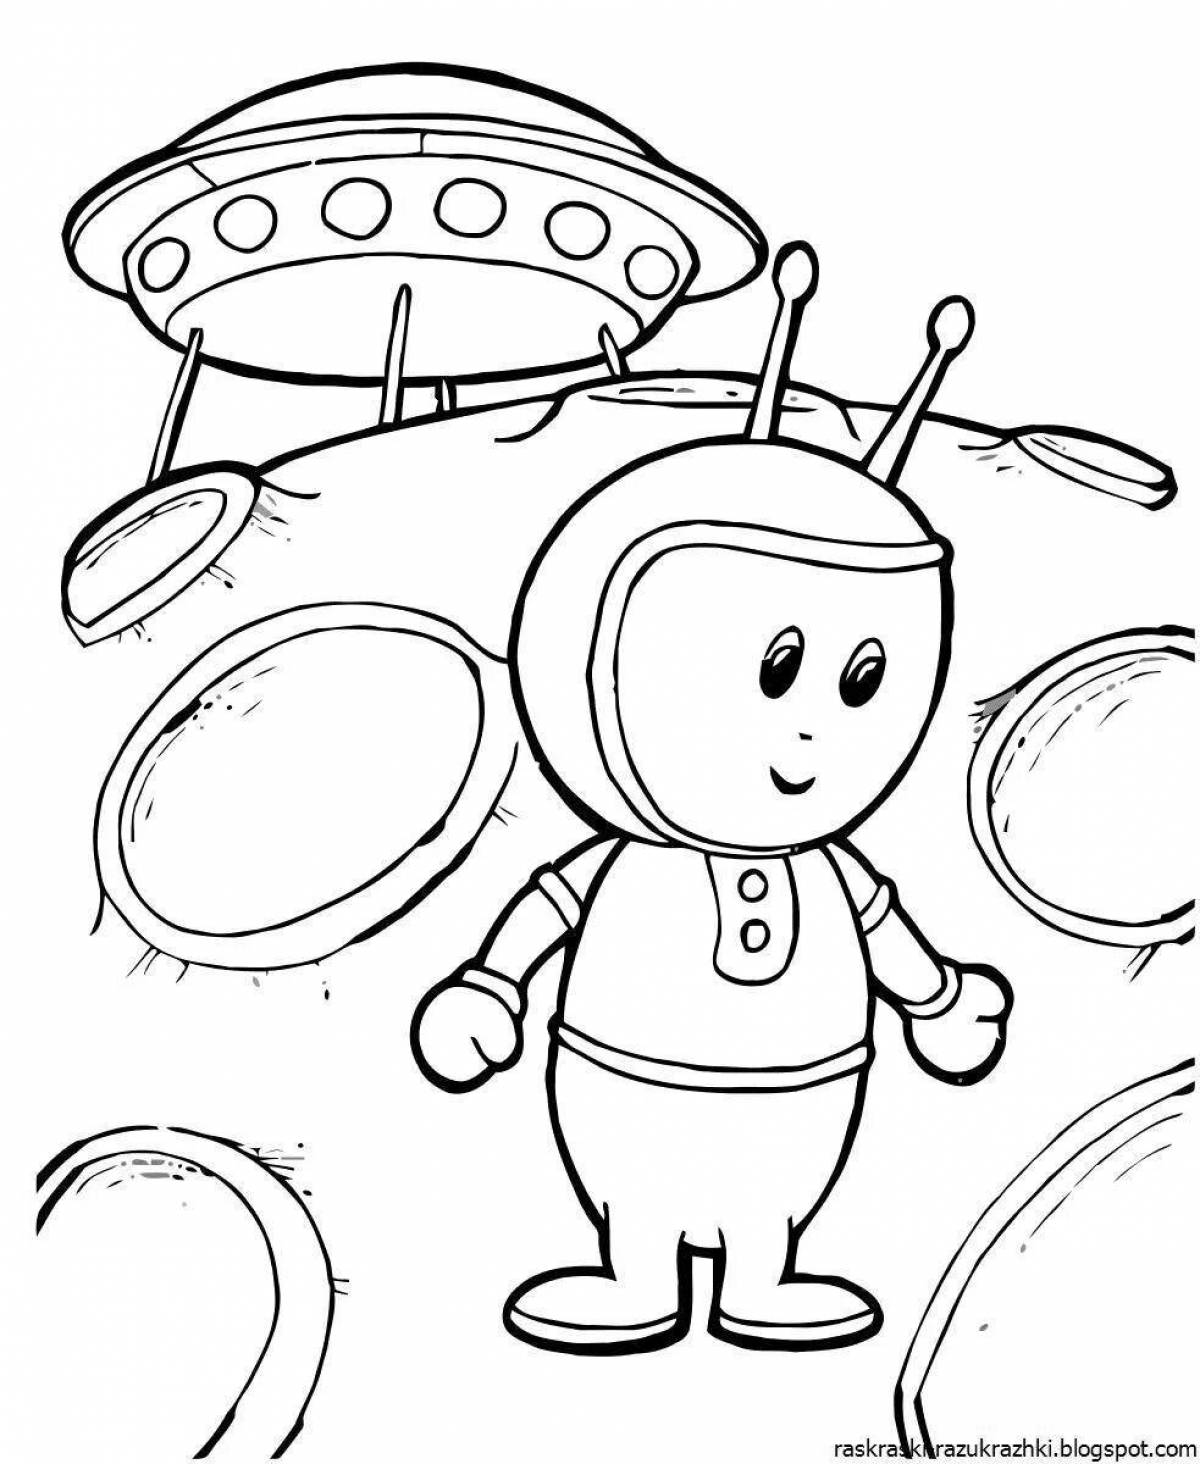 Color-frenzy space coloring page for children 3-4 years old